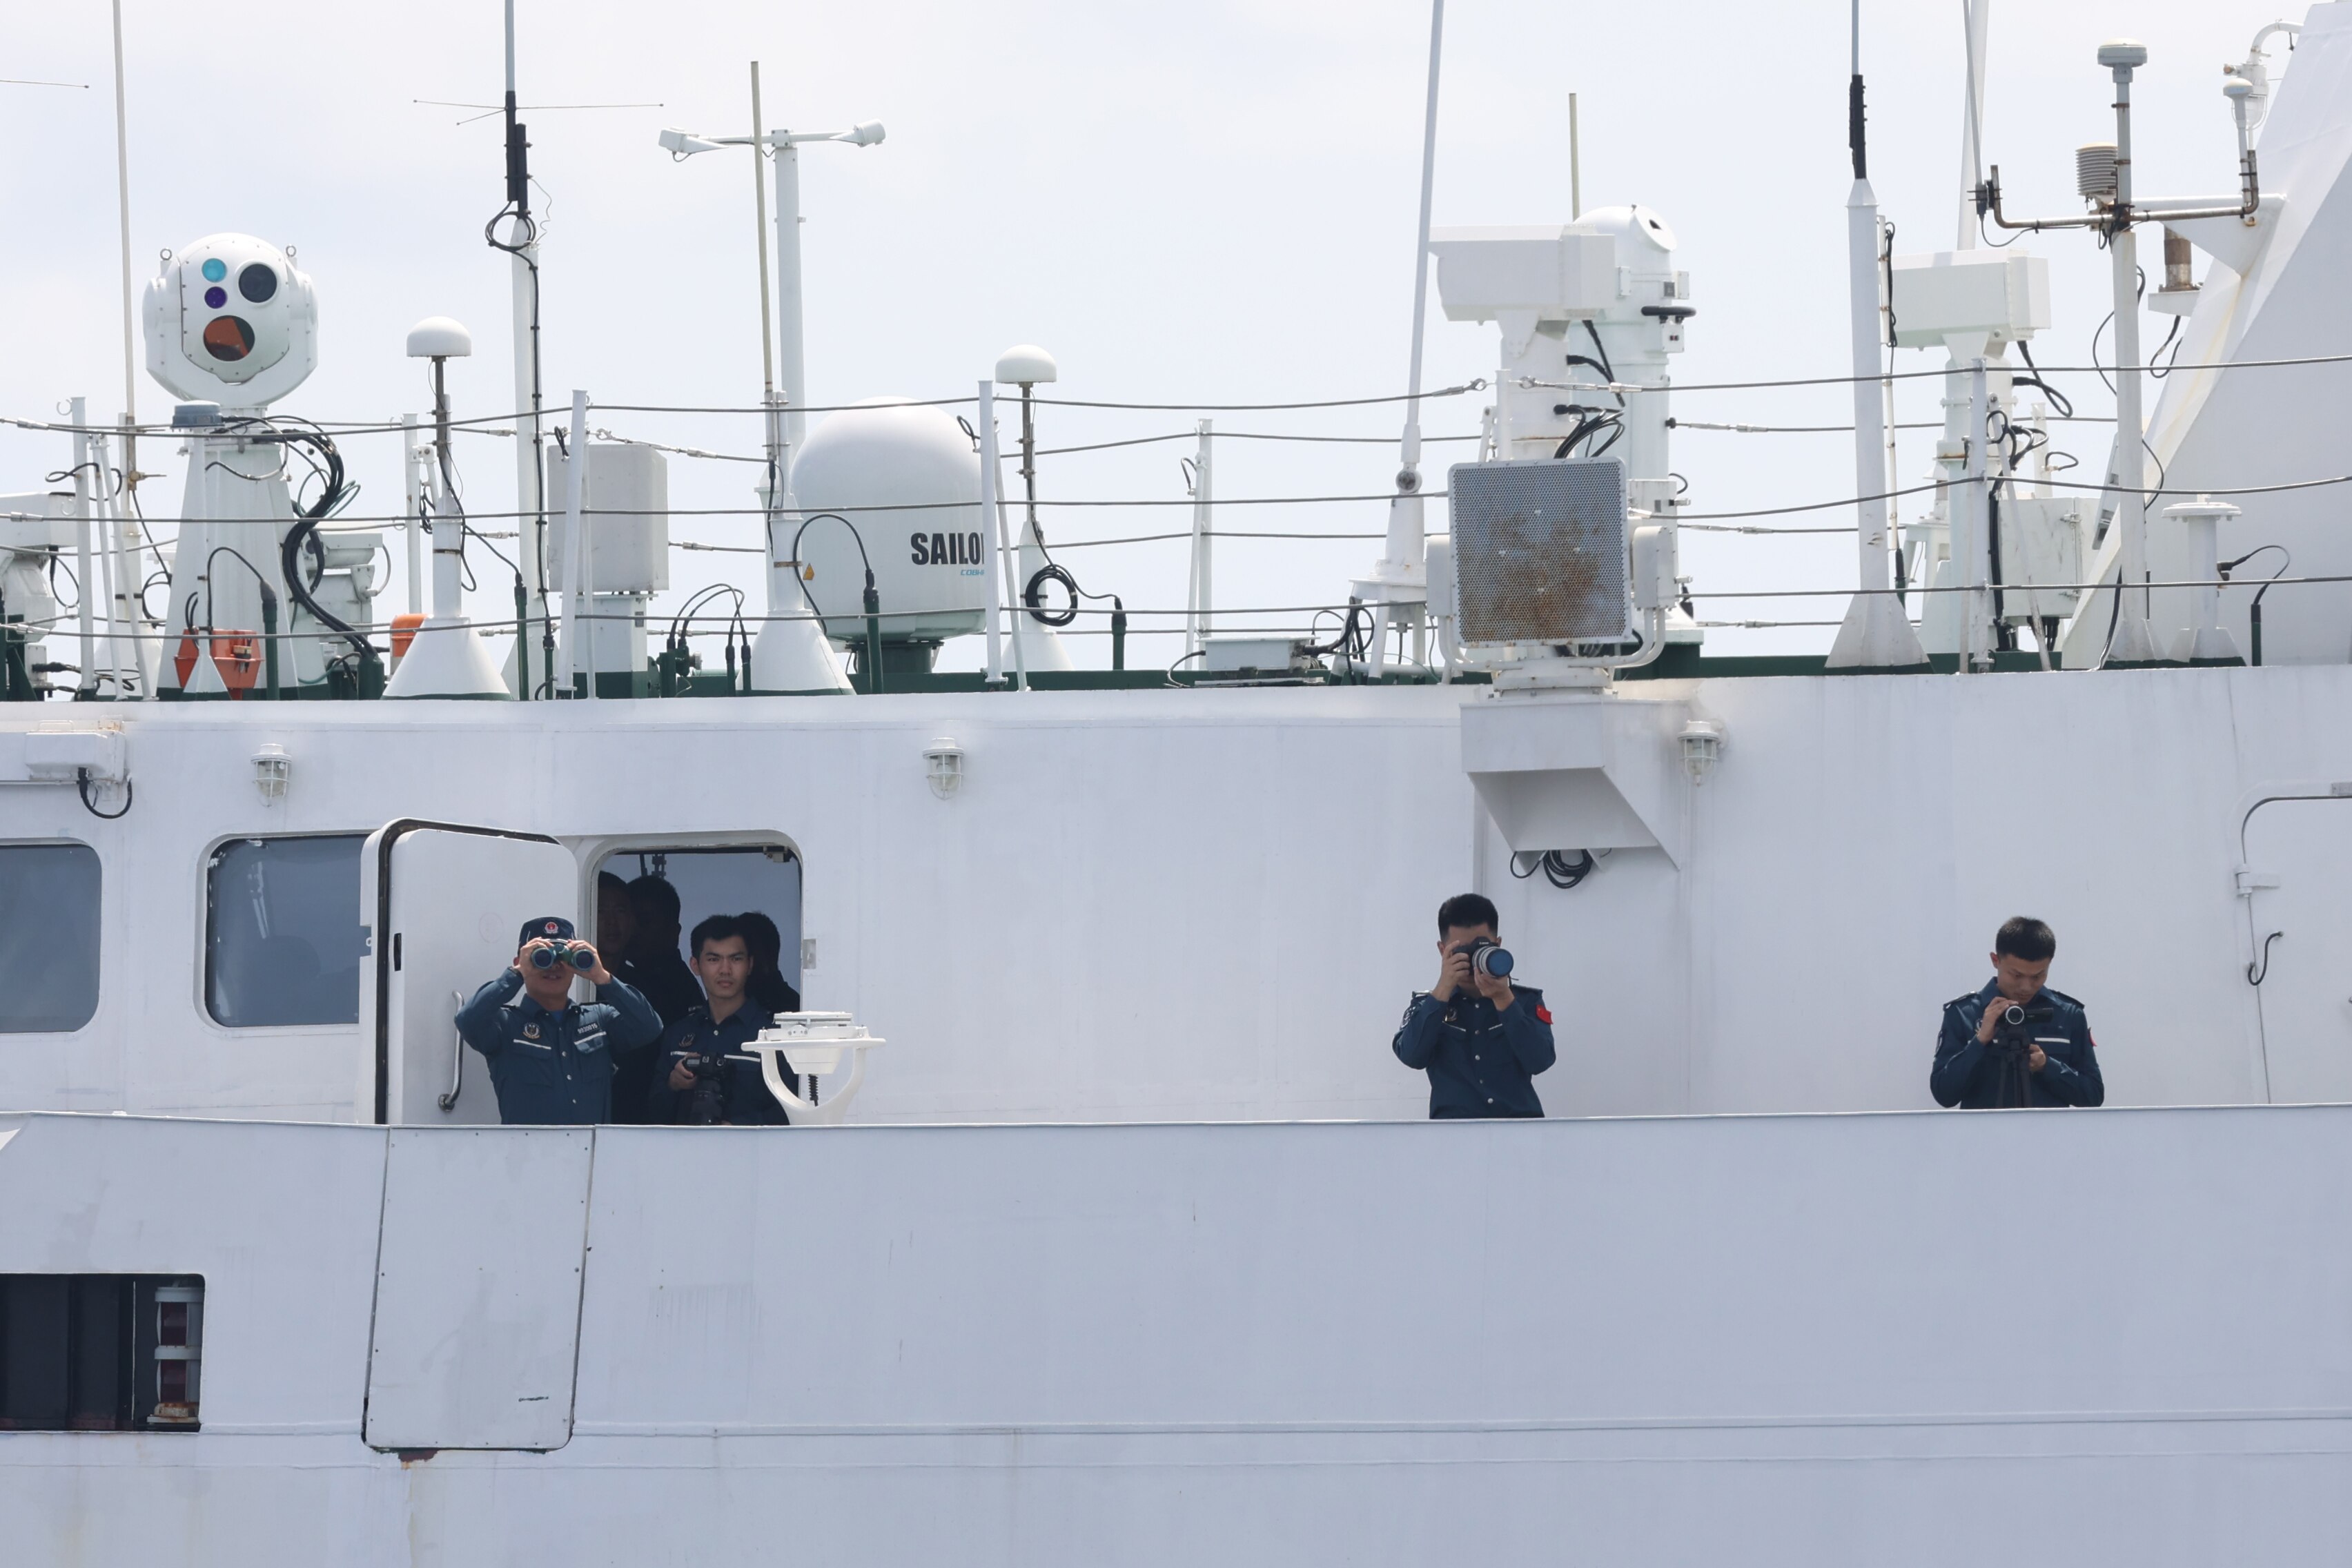 Members of the Chinese Coast Guard photograph Filipino fishermen and media observers on the side of their ship